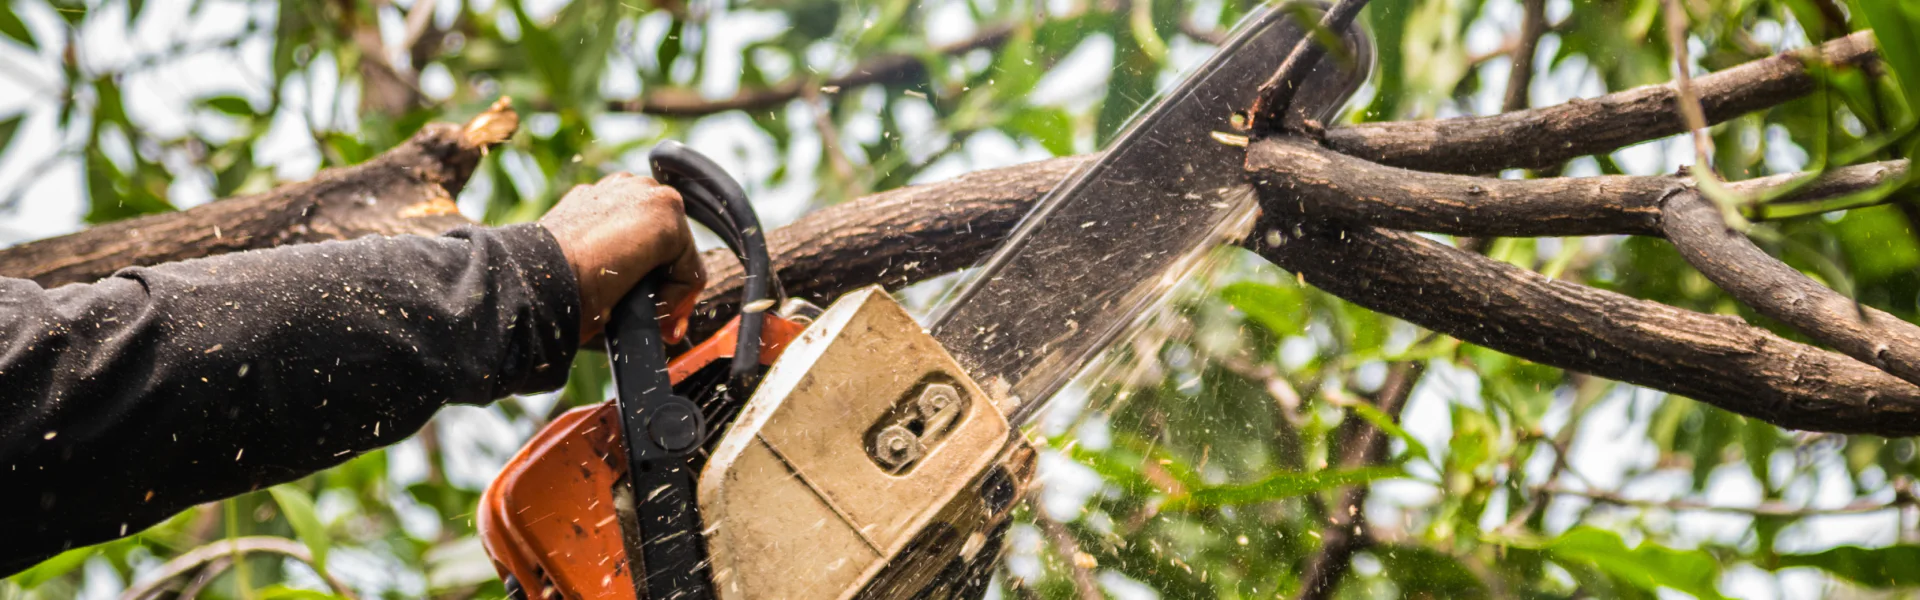 close up of a tree services contractor holding a chainsaw during tree trimming service bossier city la